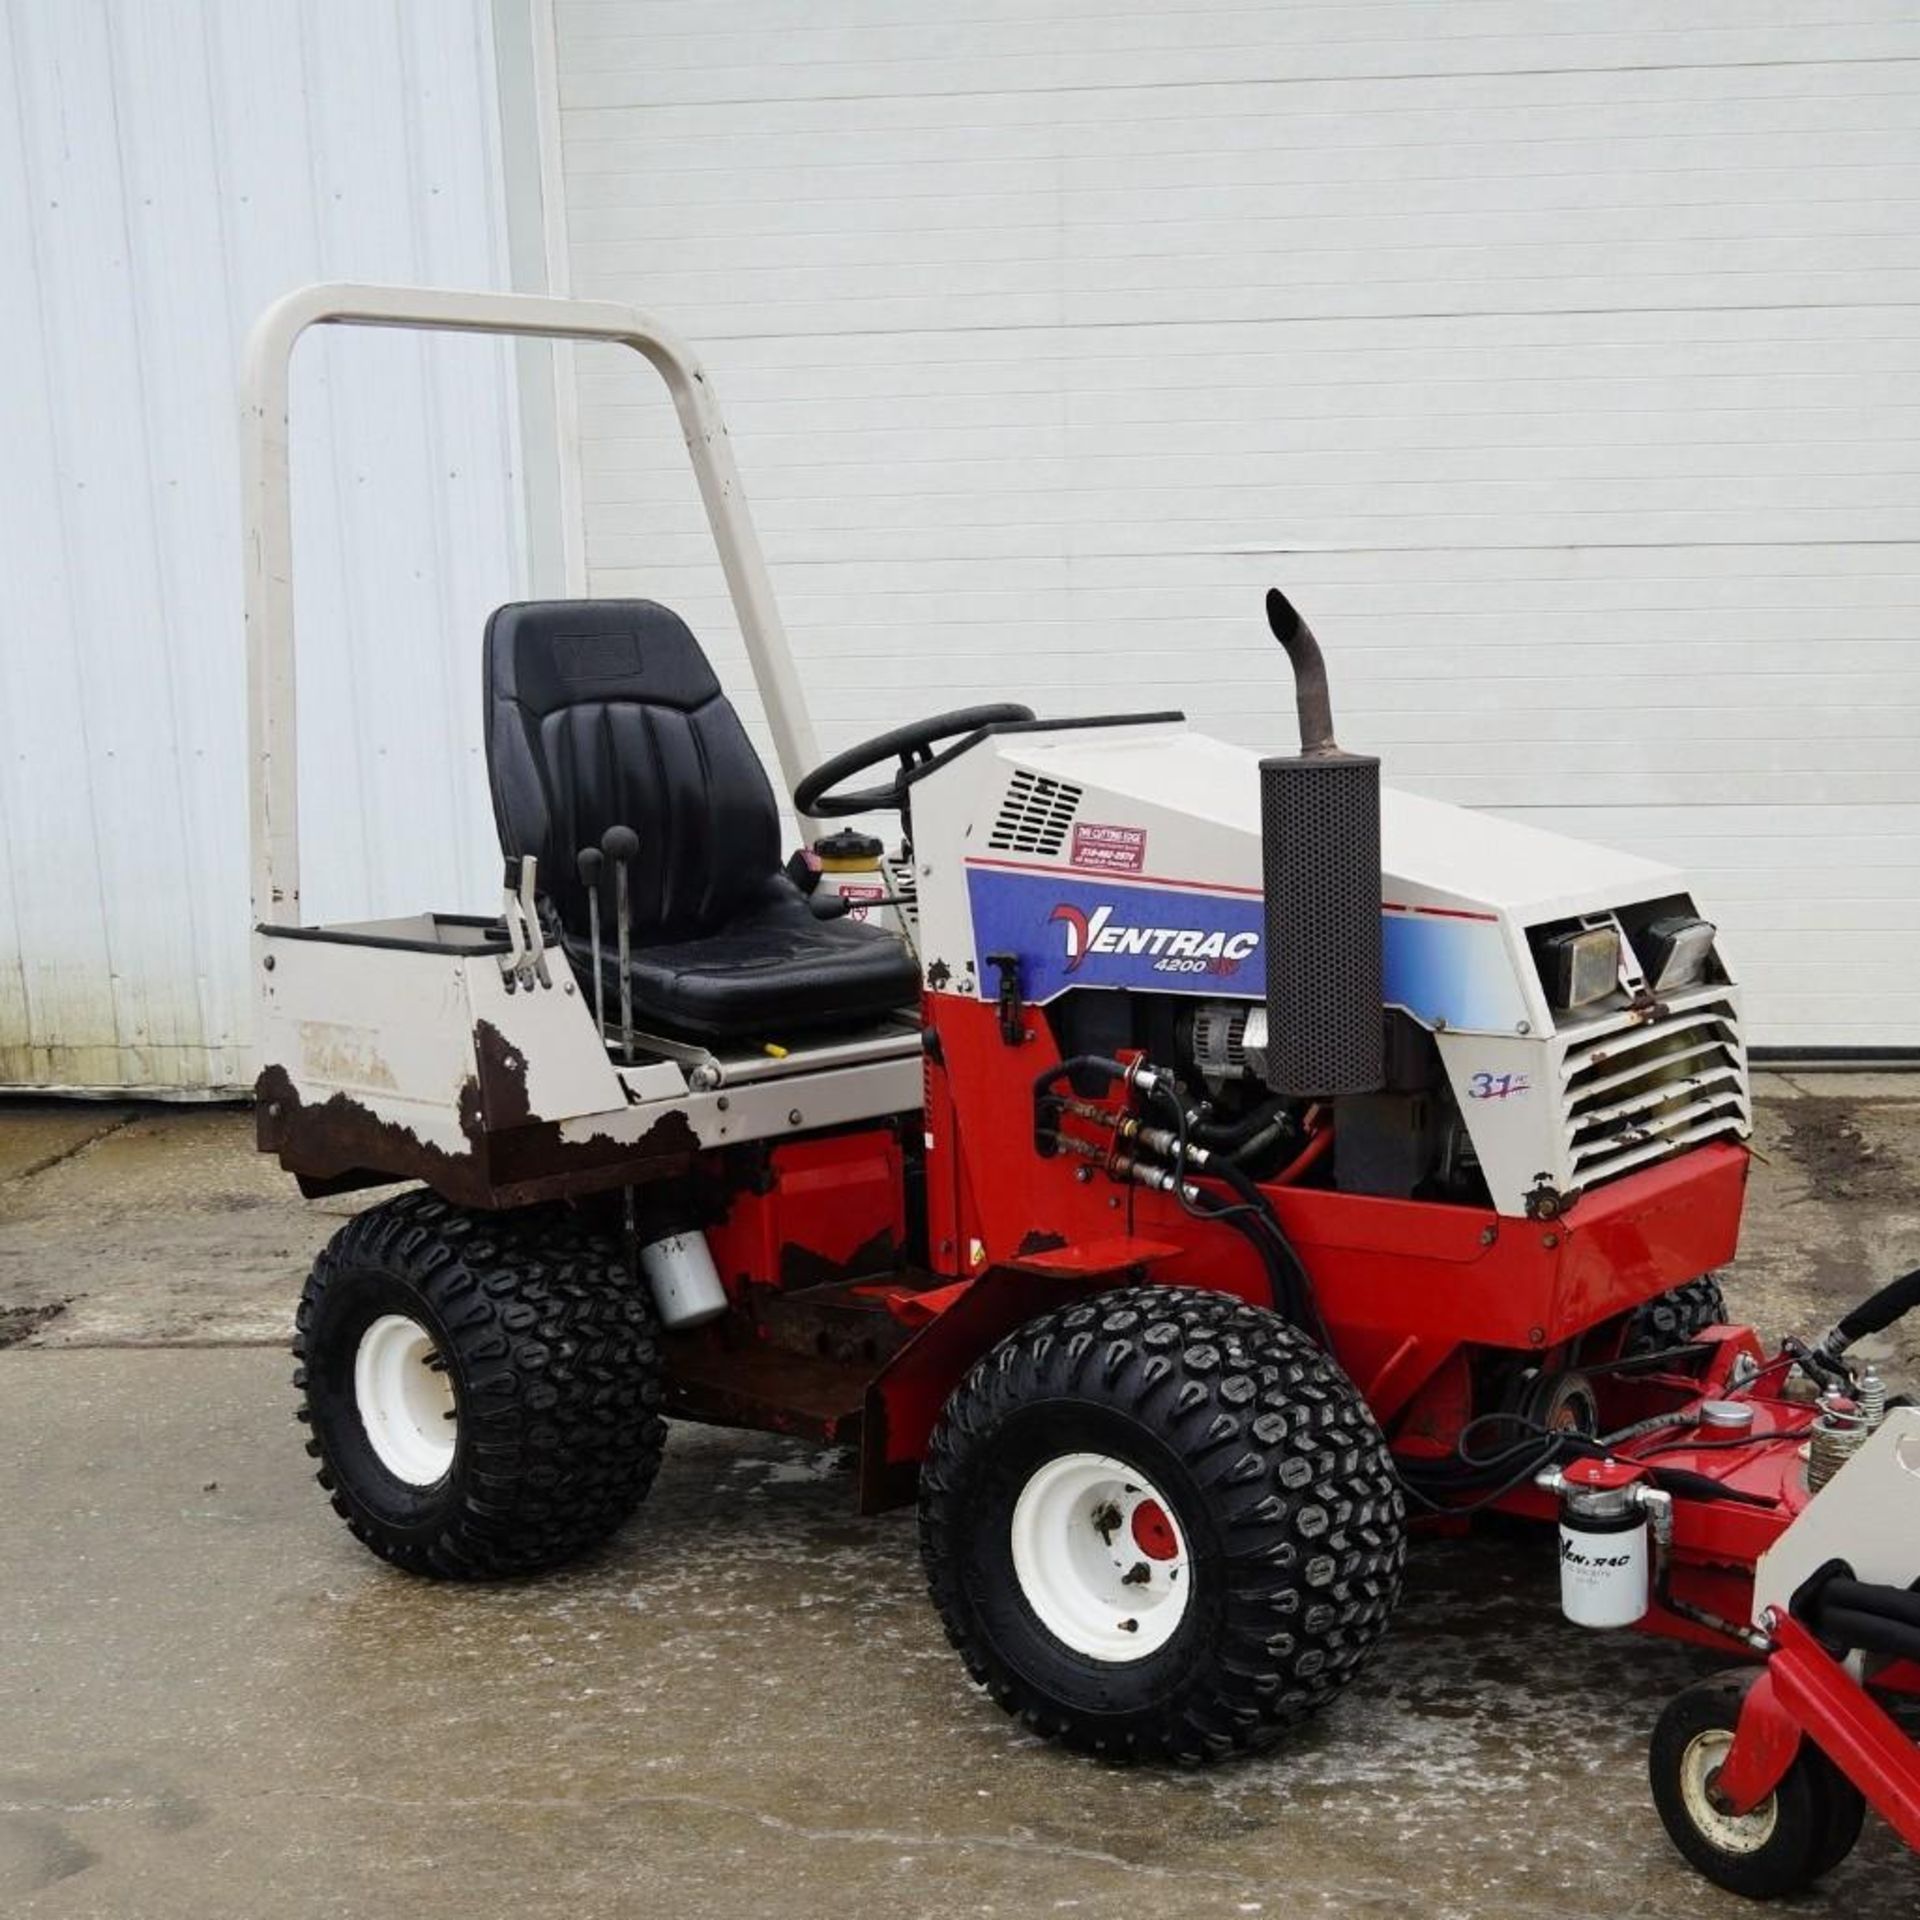 Ventrac 4200 Tractor - Image 12 of 37